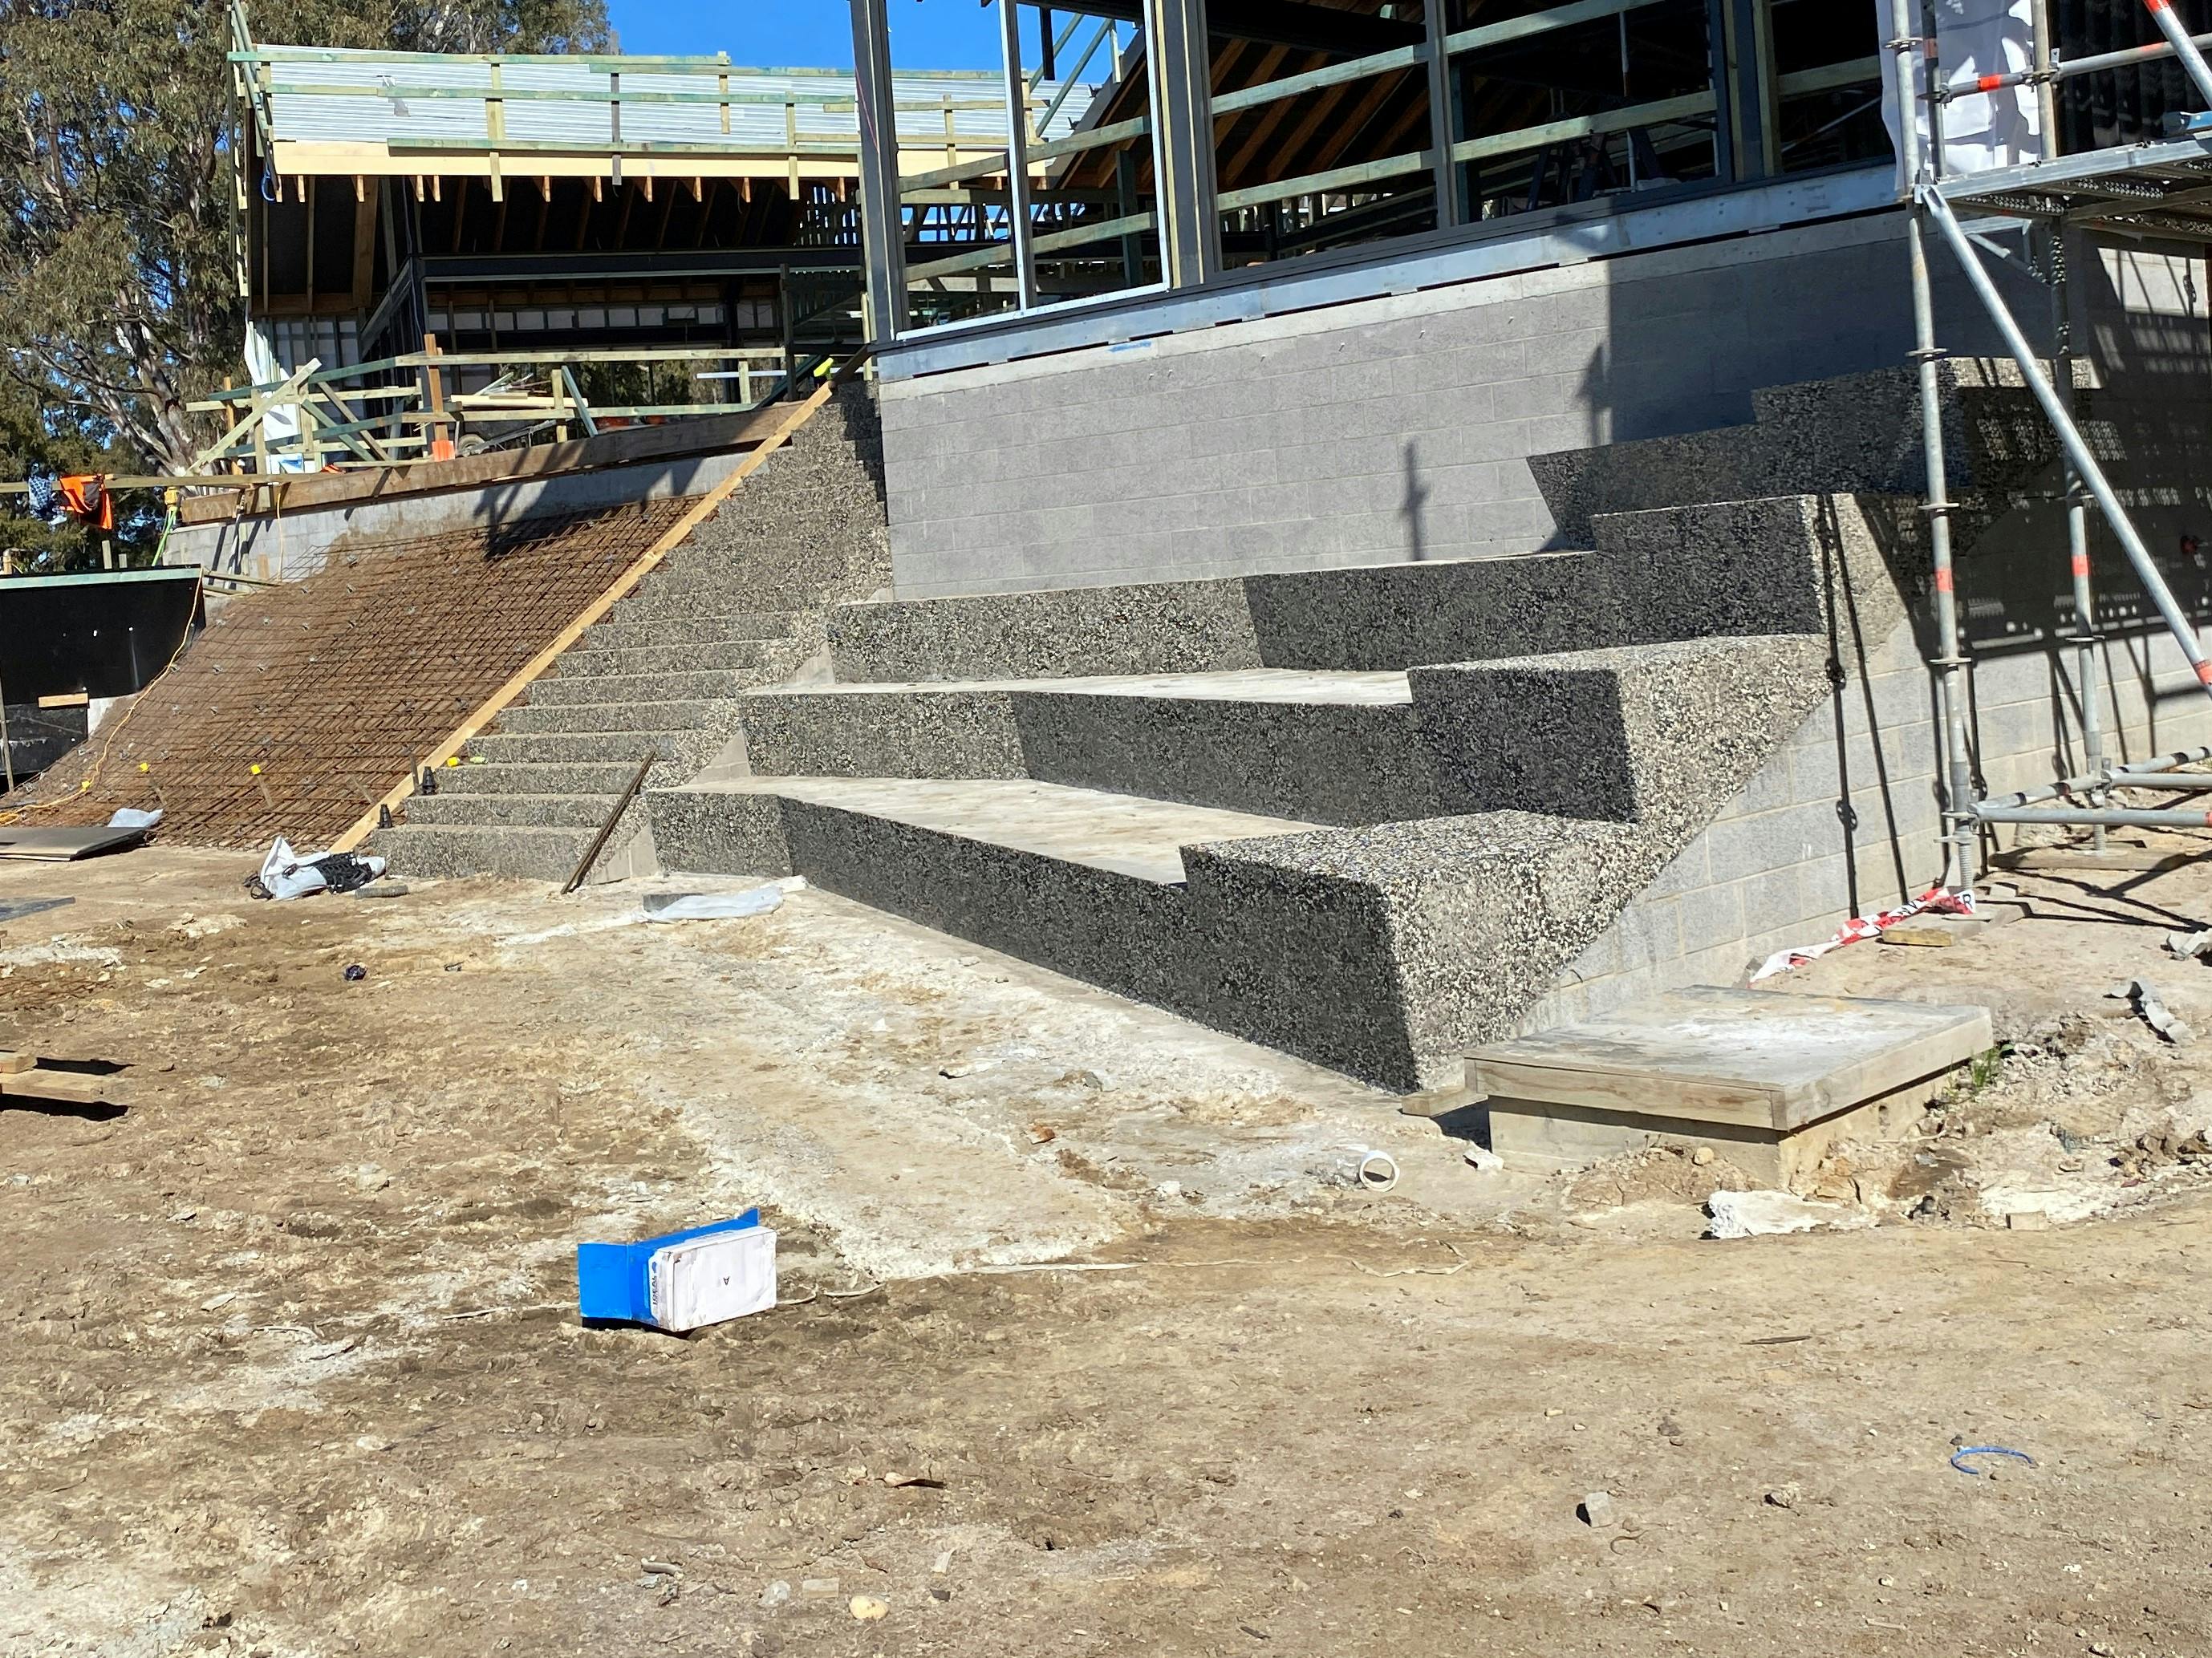 Bleacher seating underway. Handrails will be installed on the steps leading up to the building.